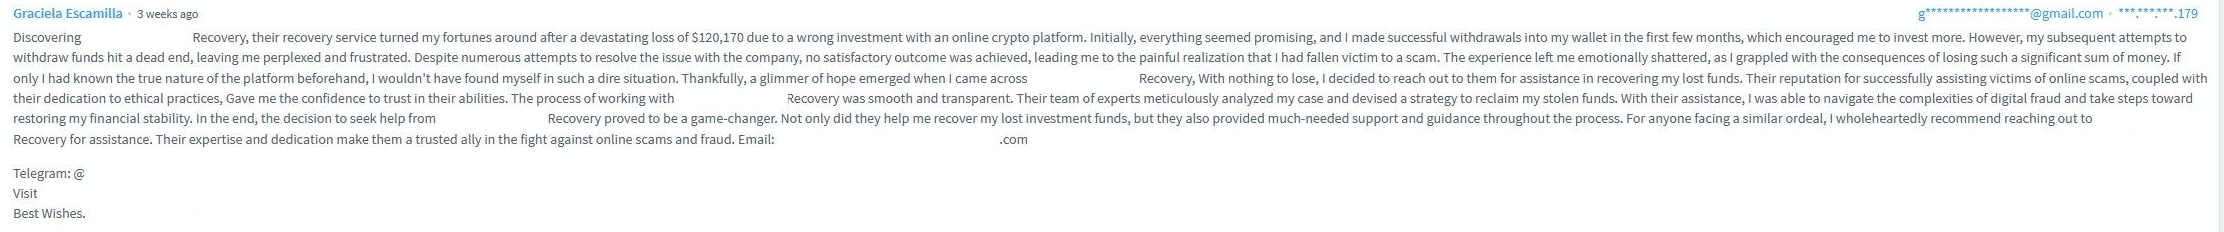 crypto recovery scam sample 3 (1)